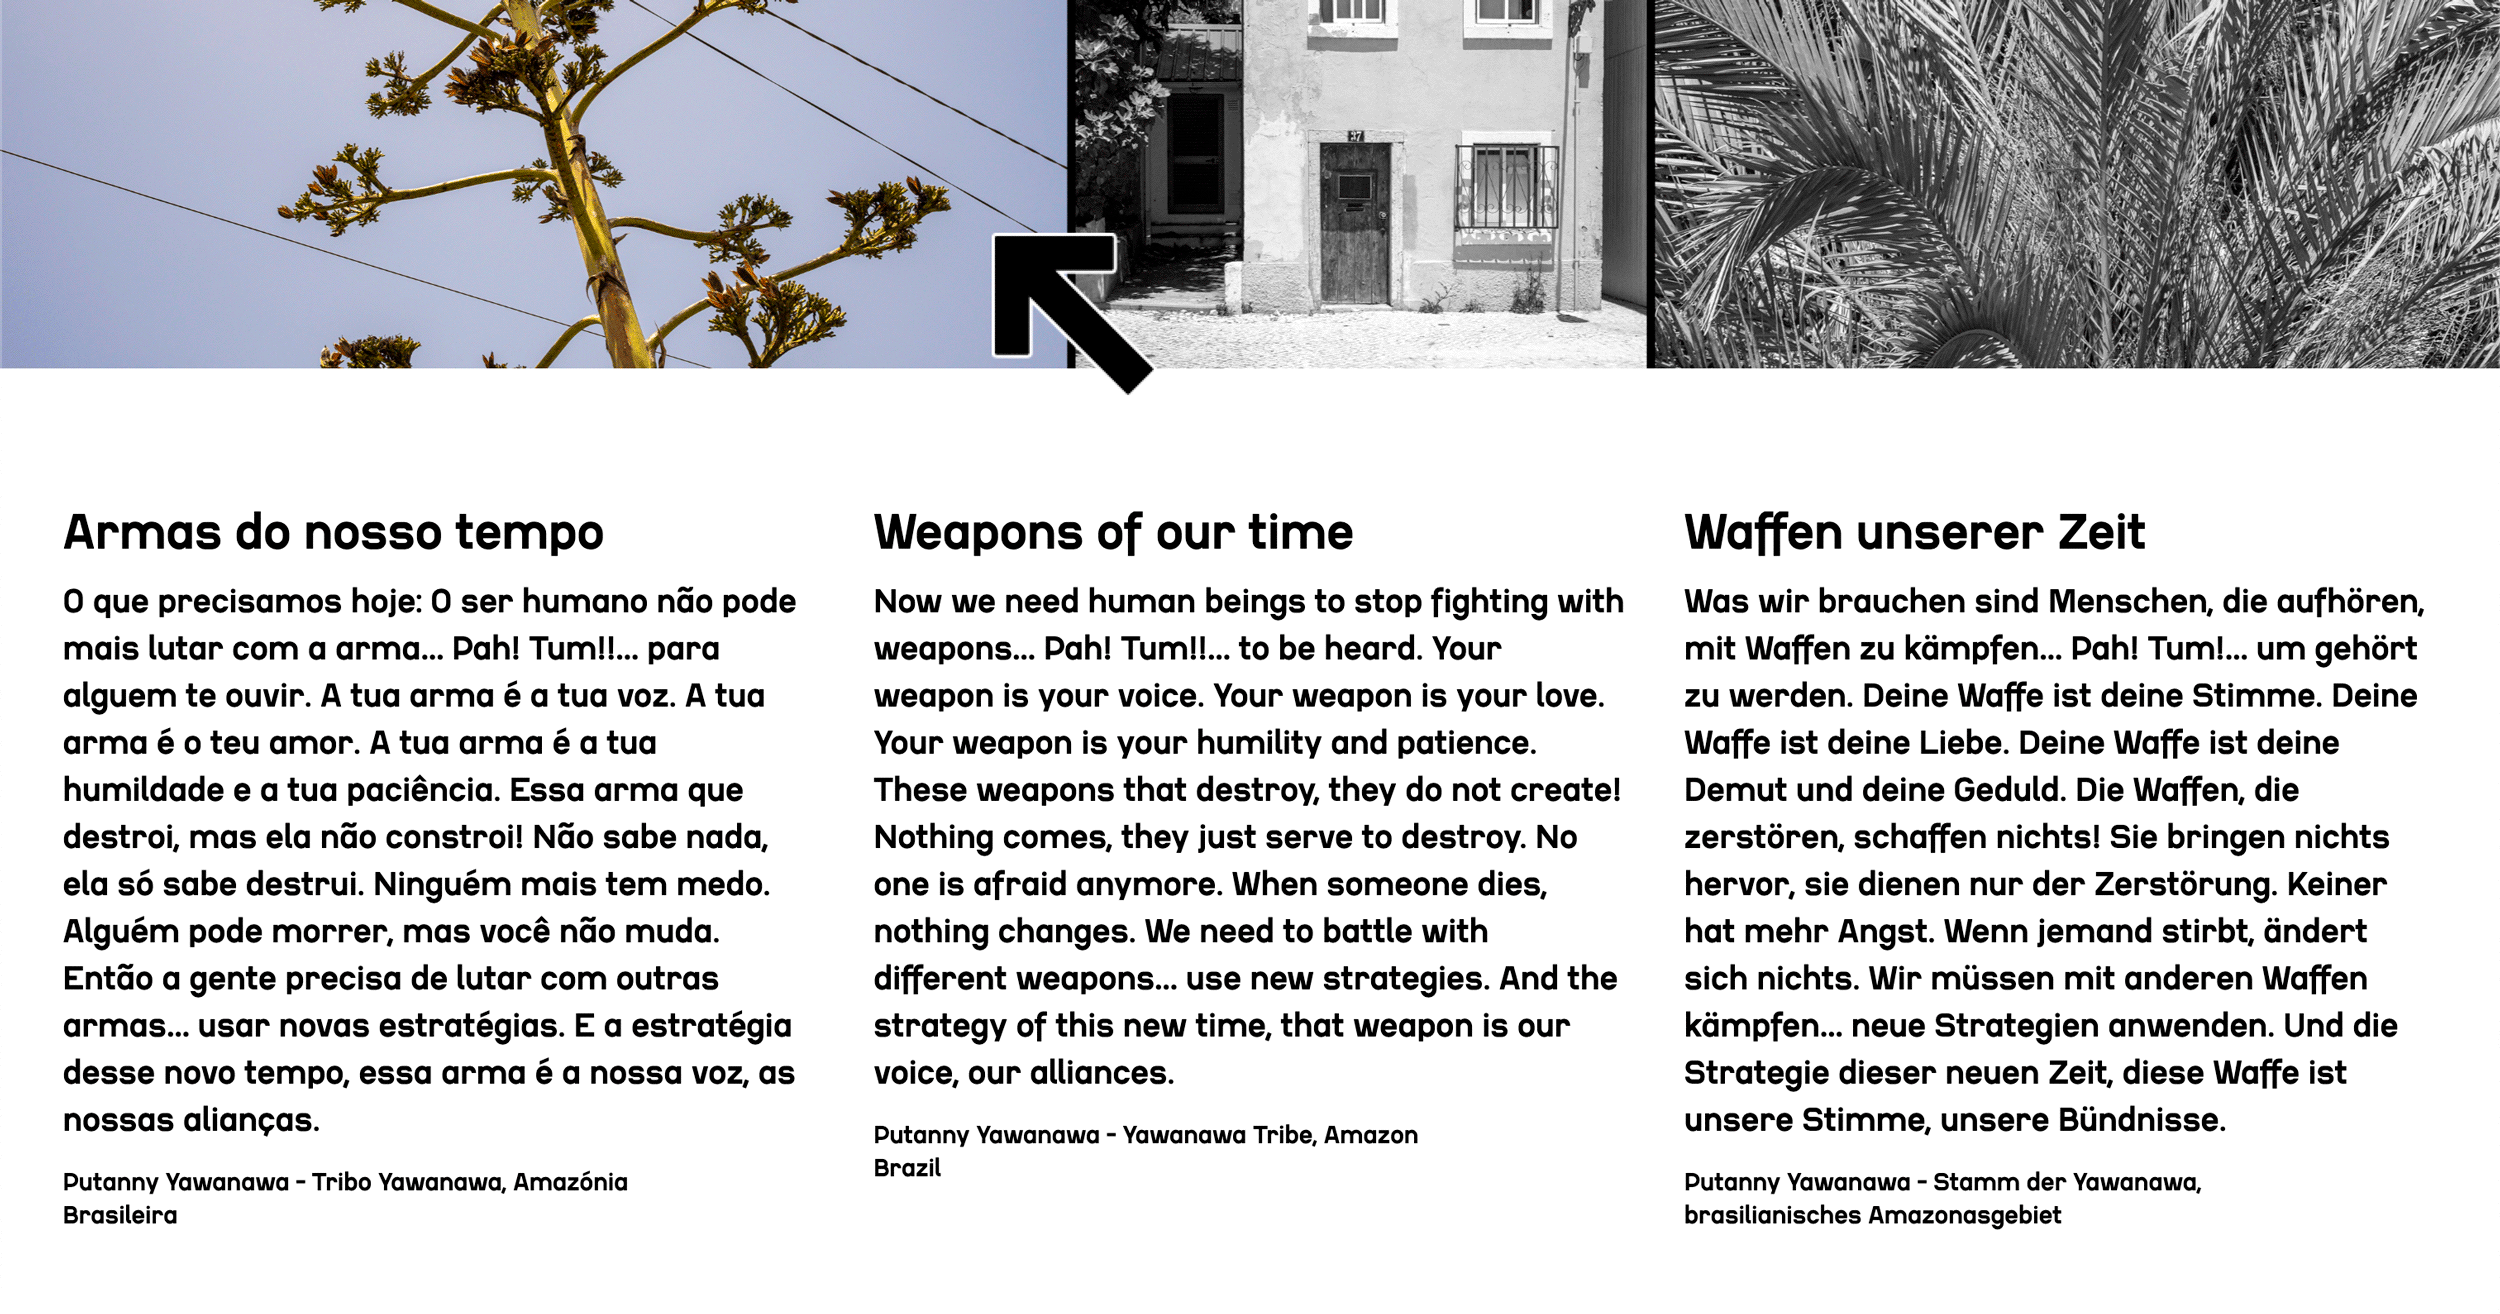 Büro Gestalten: Pedro Microsite (Weapons of our Time)